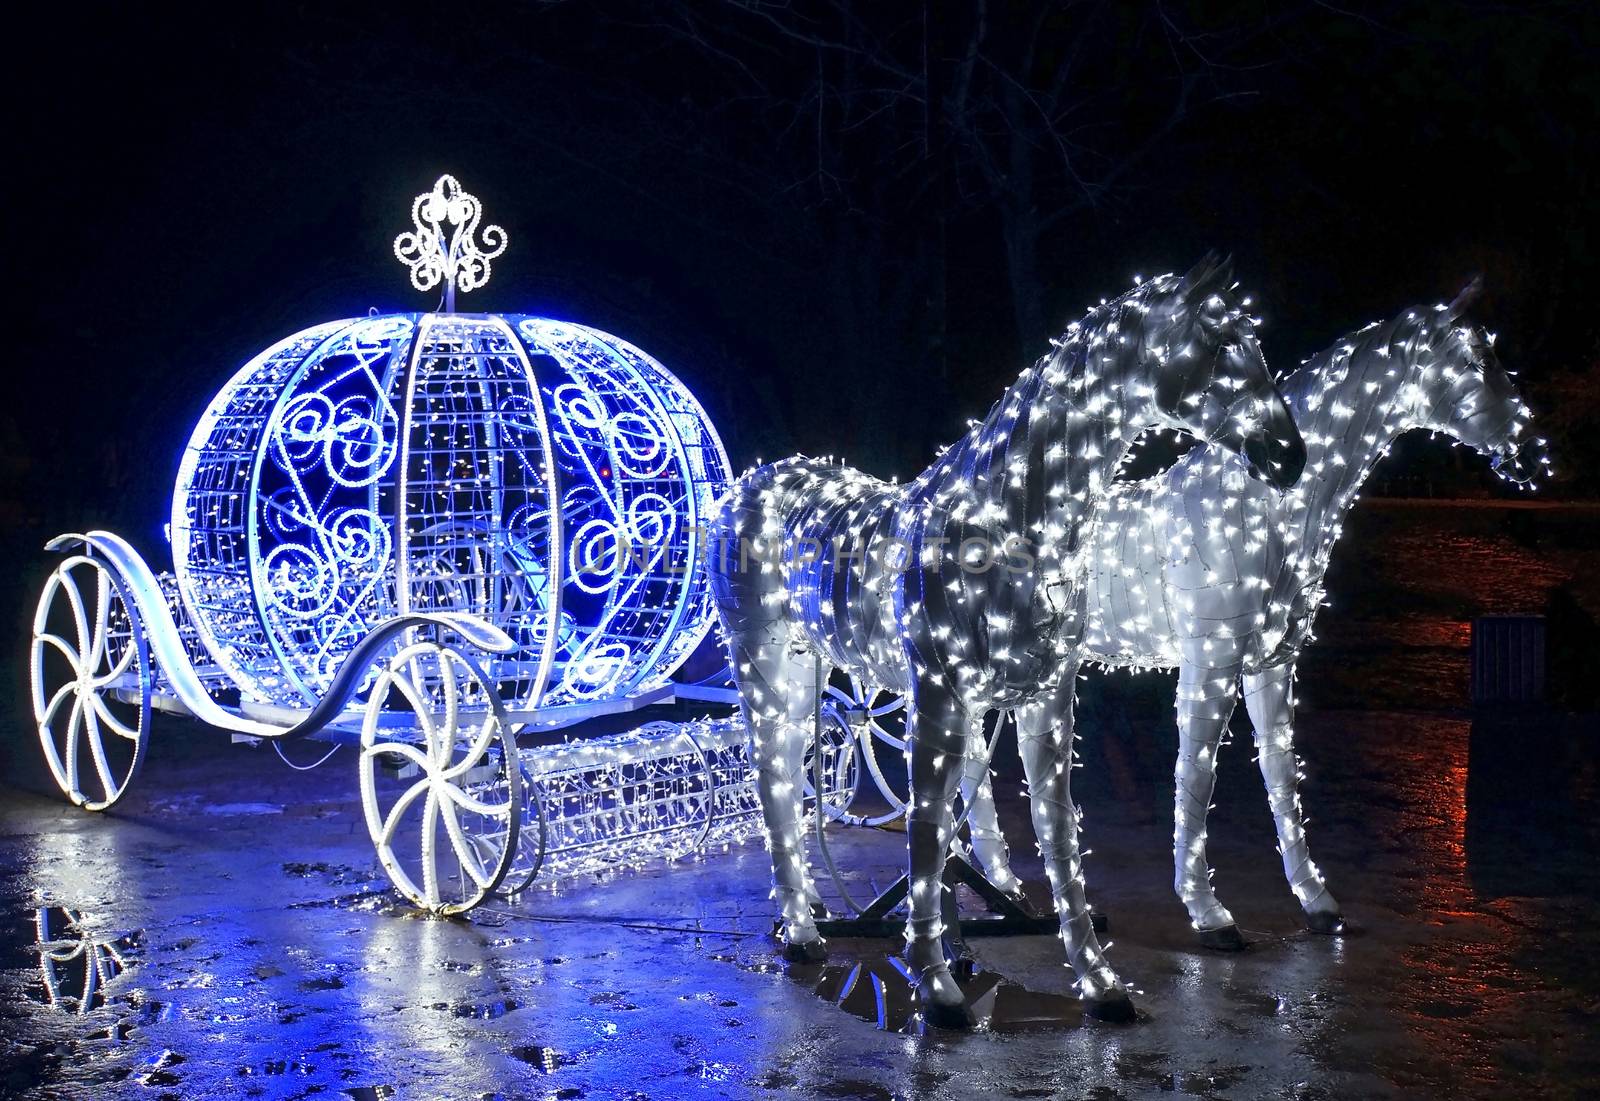 Decorative carriage with horses decorated with lights  by Chiffanna